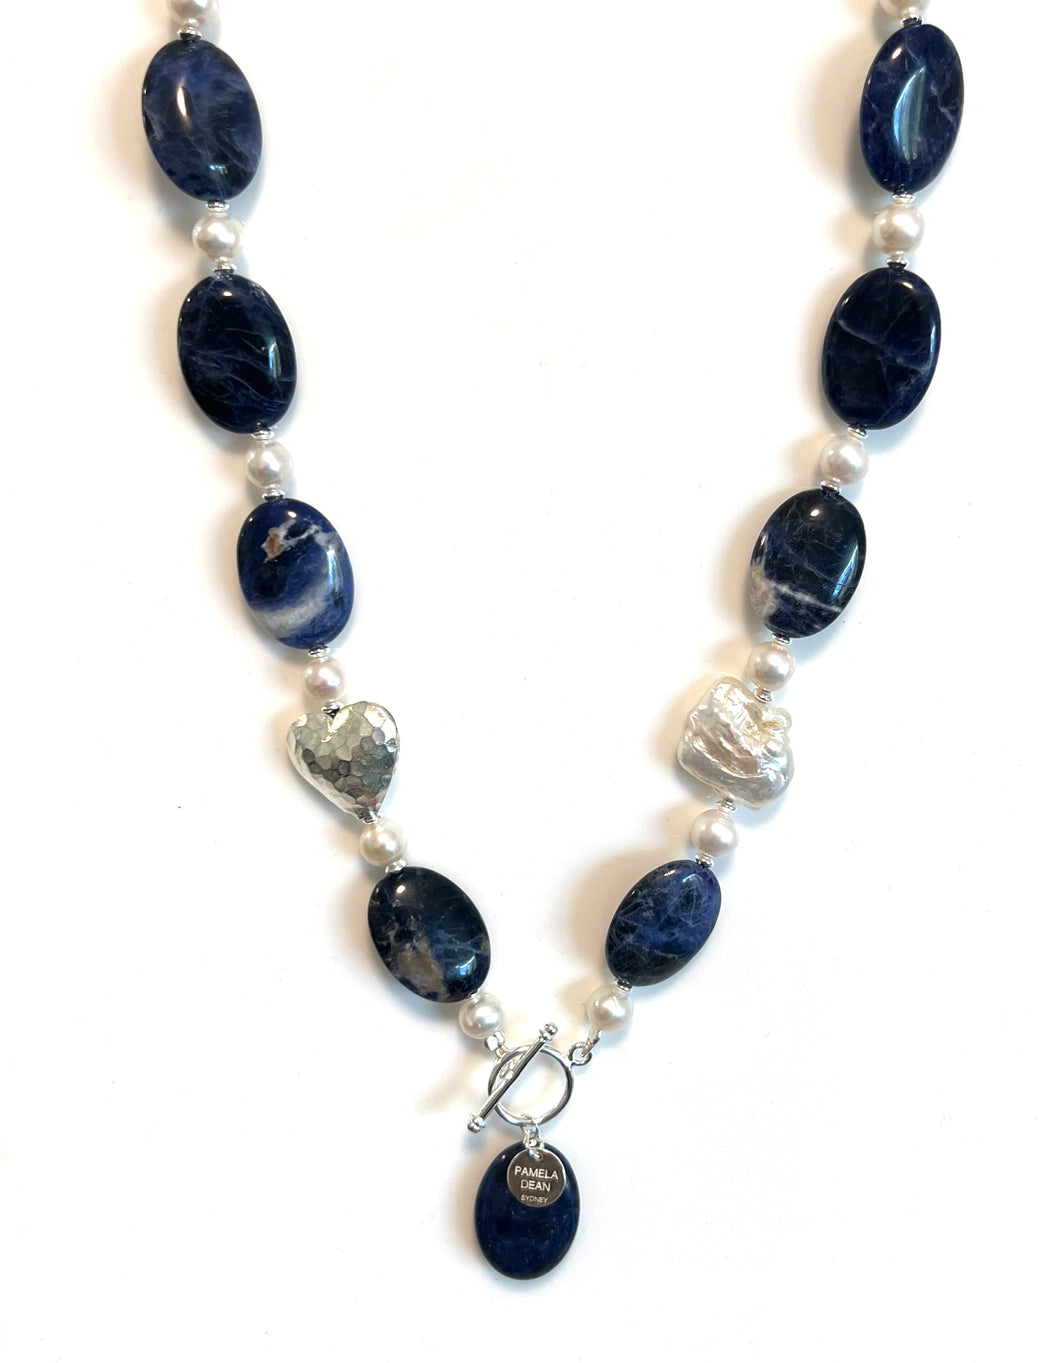 Australian Handmade Blue Necklace with Dumortierite Baroque and Freshwater Pearls and Sterling Silver